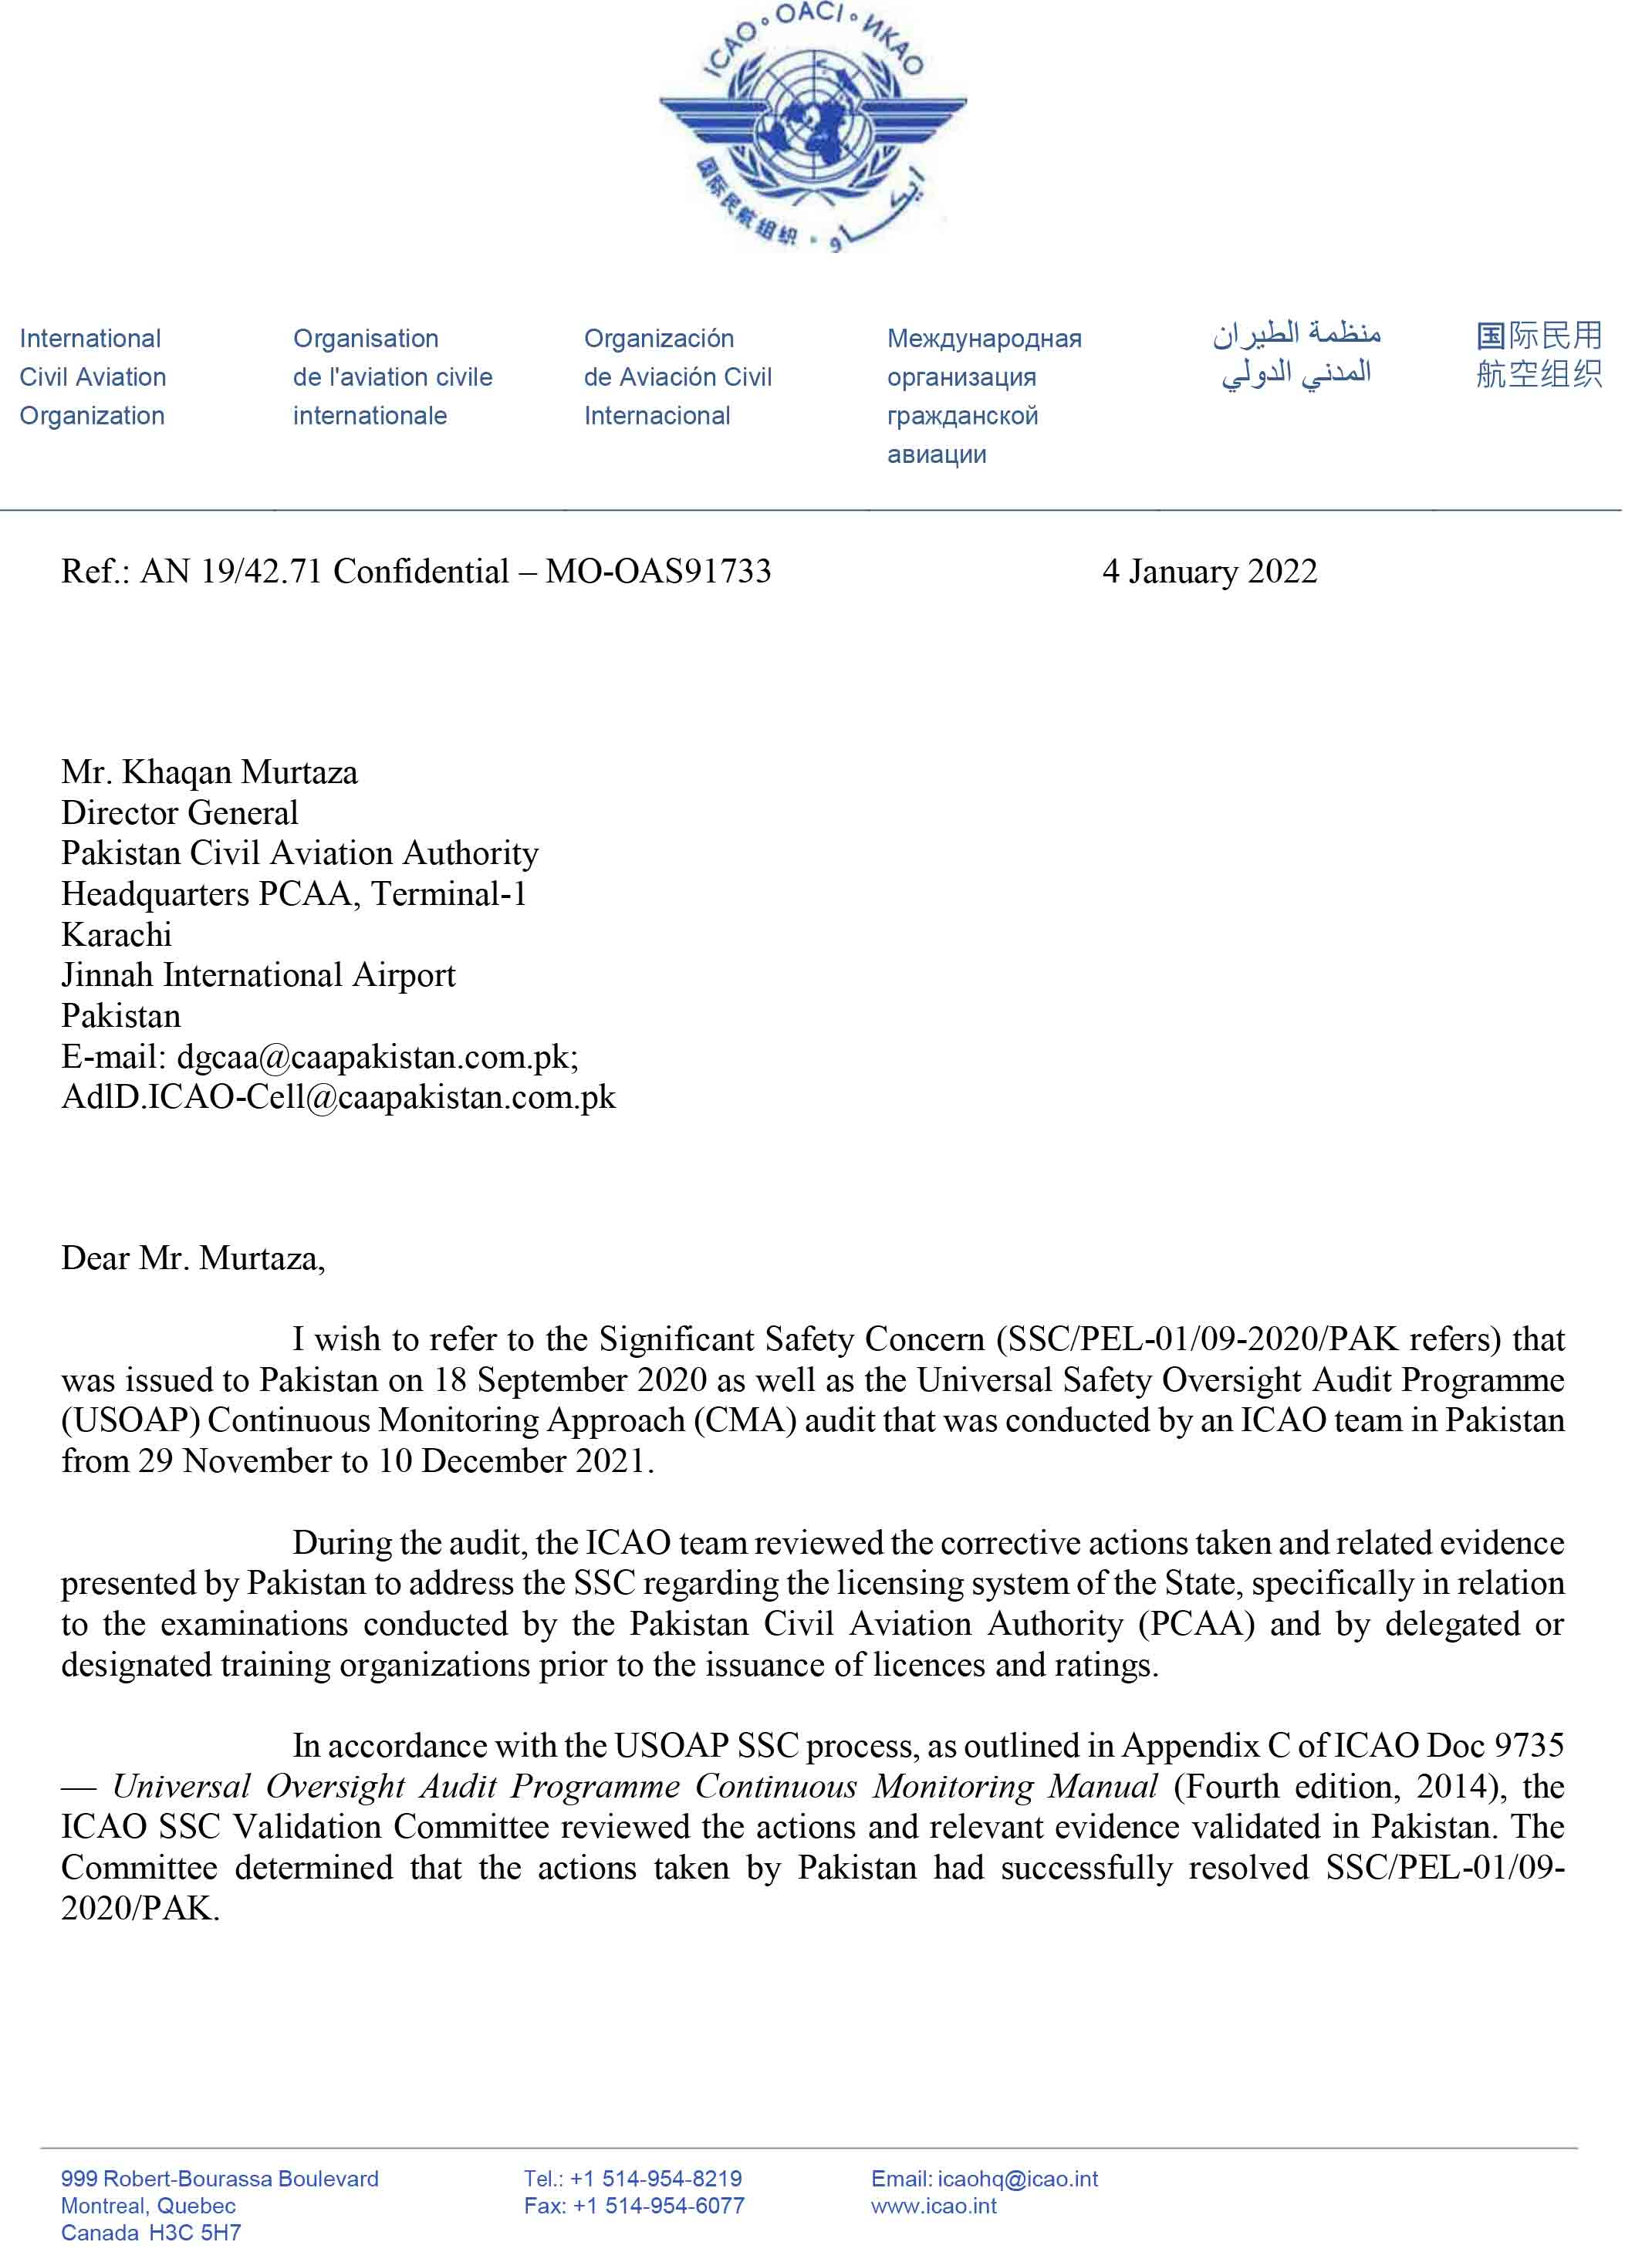 The image shows the ICAO letter written to CAA.